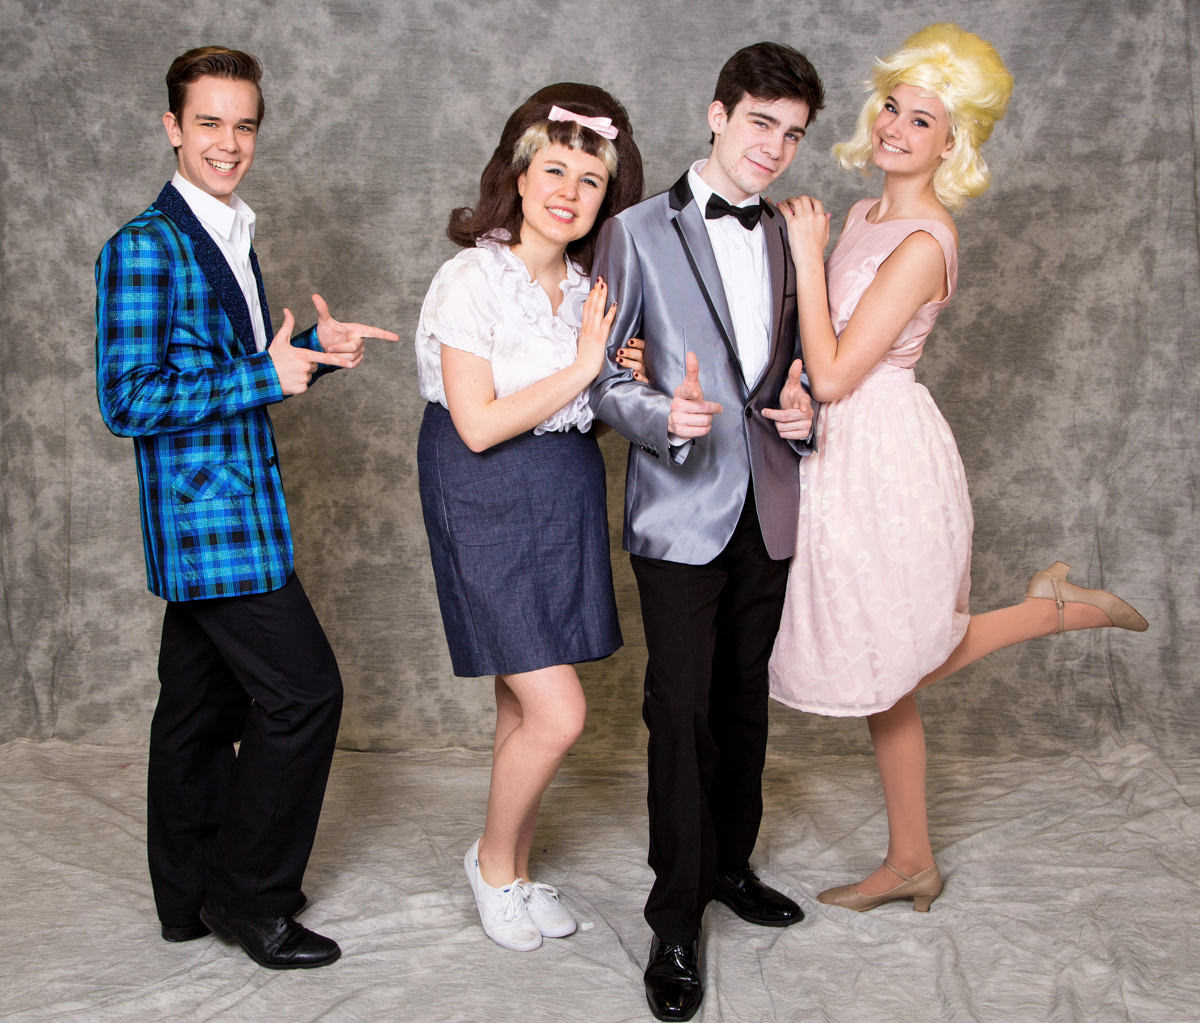 SKIT’s production of HAIRSPRAY features some of the “nicest kids in town” including (L-R): Jonah Lione, 16, of Clinton; Alyssa van Veldheuisen, 17, of Flemington; Avery Stoker, 18, of Clinton; and, Natalie Mehl, 16, of Lebanon Twp. Only four performances at Voorhees High School in Glen Gardner, NJ: Saturday, May 6 at 7:30pm; Sunday, May 7 at 2:00pm; Friday, May 12 at 7:30pm; and, Saturday, May 13 at 7:30pm. Tickets available at www.showkids.org